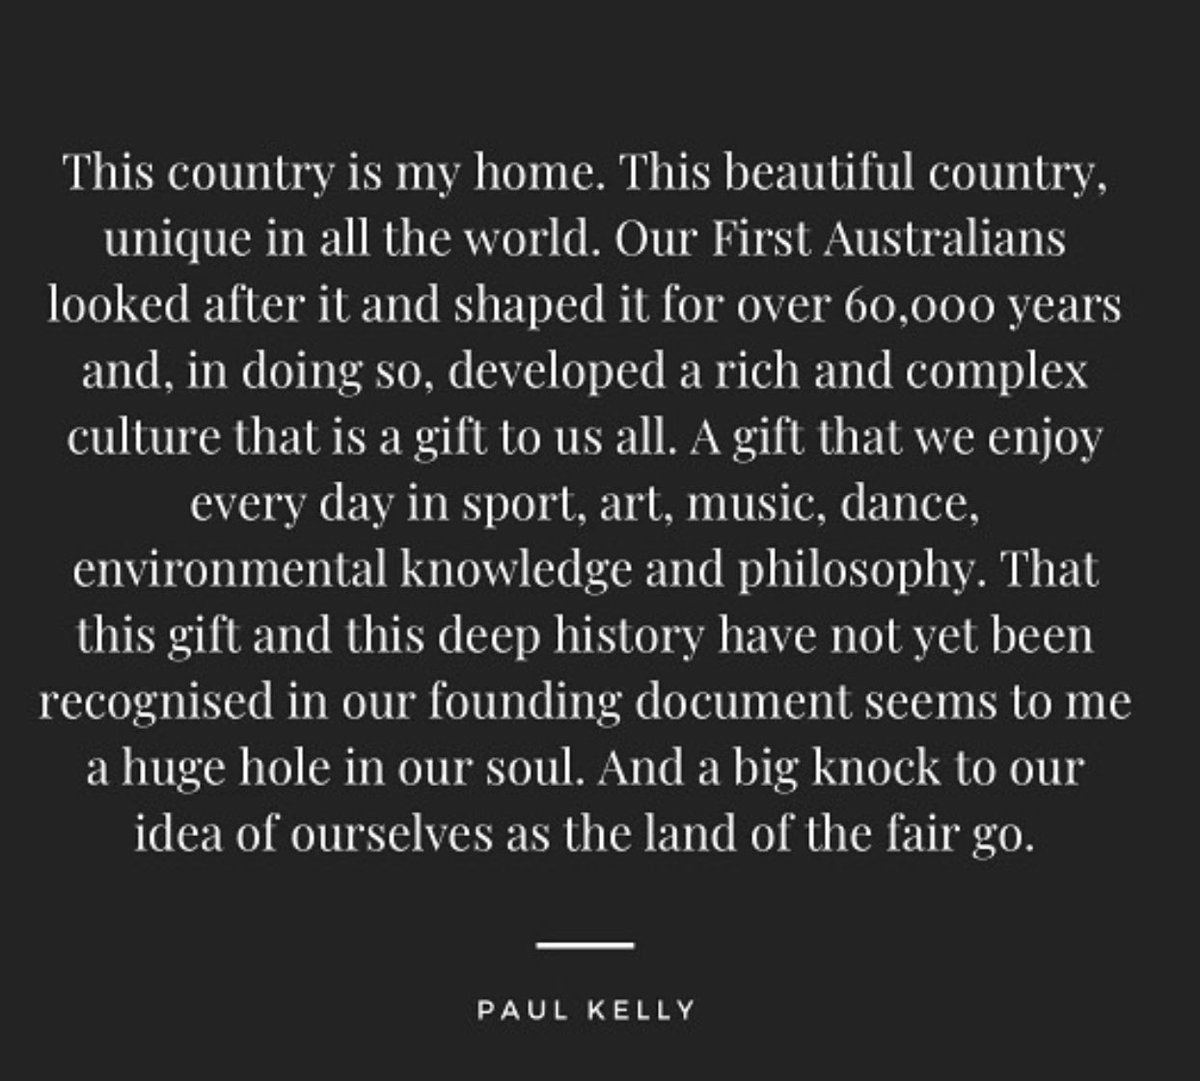 Paul Kelly’s posted a succinct, compelling three-panel #Yes case over on Instagram and it begins as engagingly & evocatively as any of his great songs. #Yes23 #Voicetoparliament